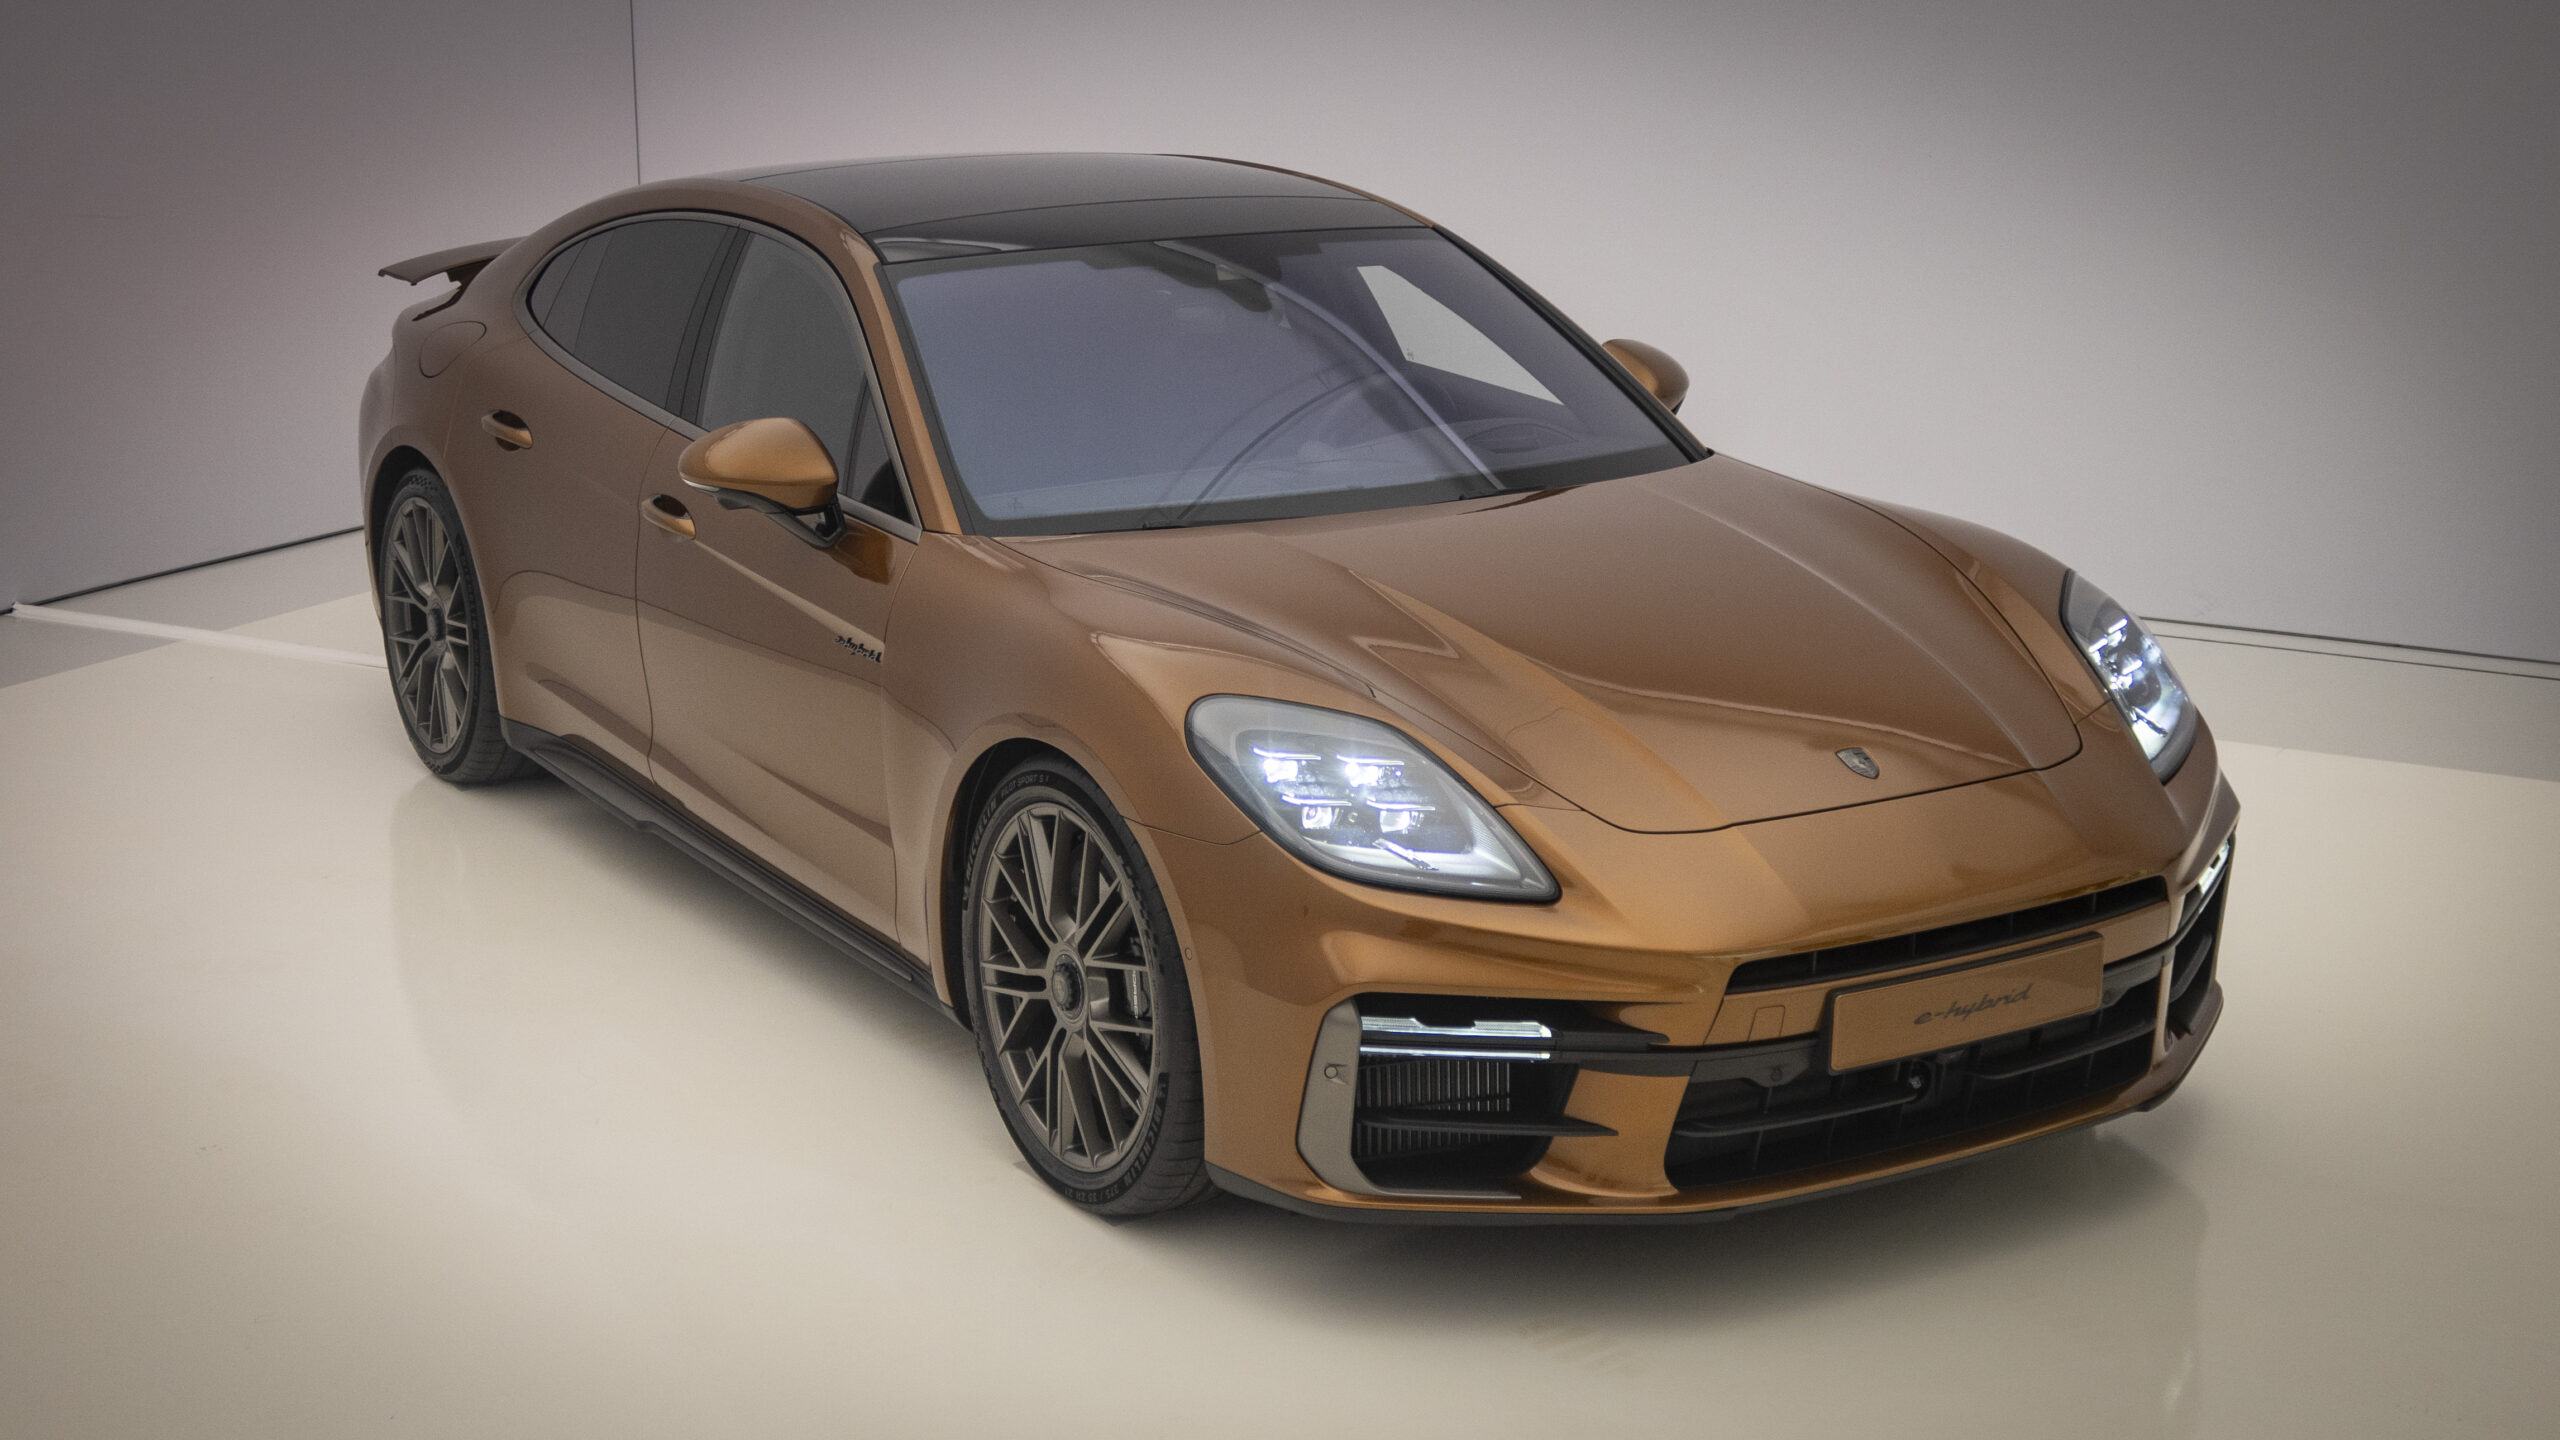 More digital, more luxurious, more efficient: the new Panamera